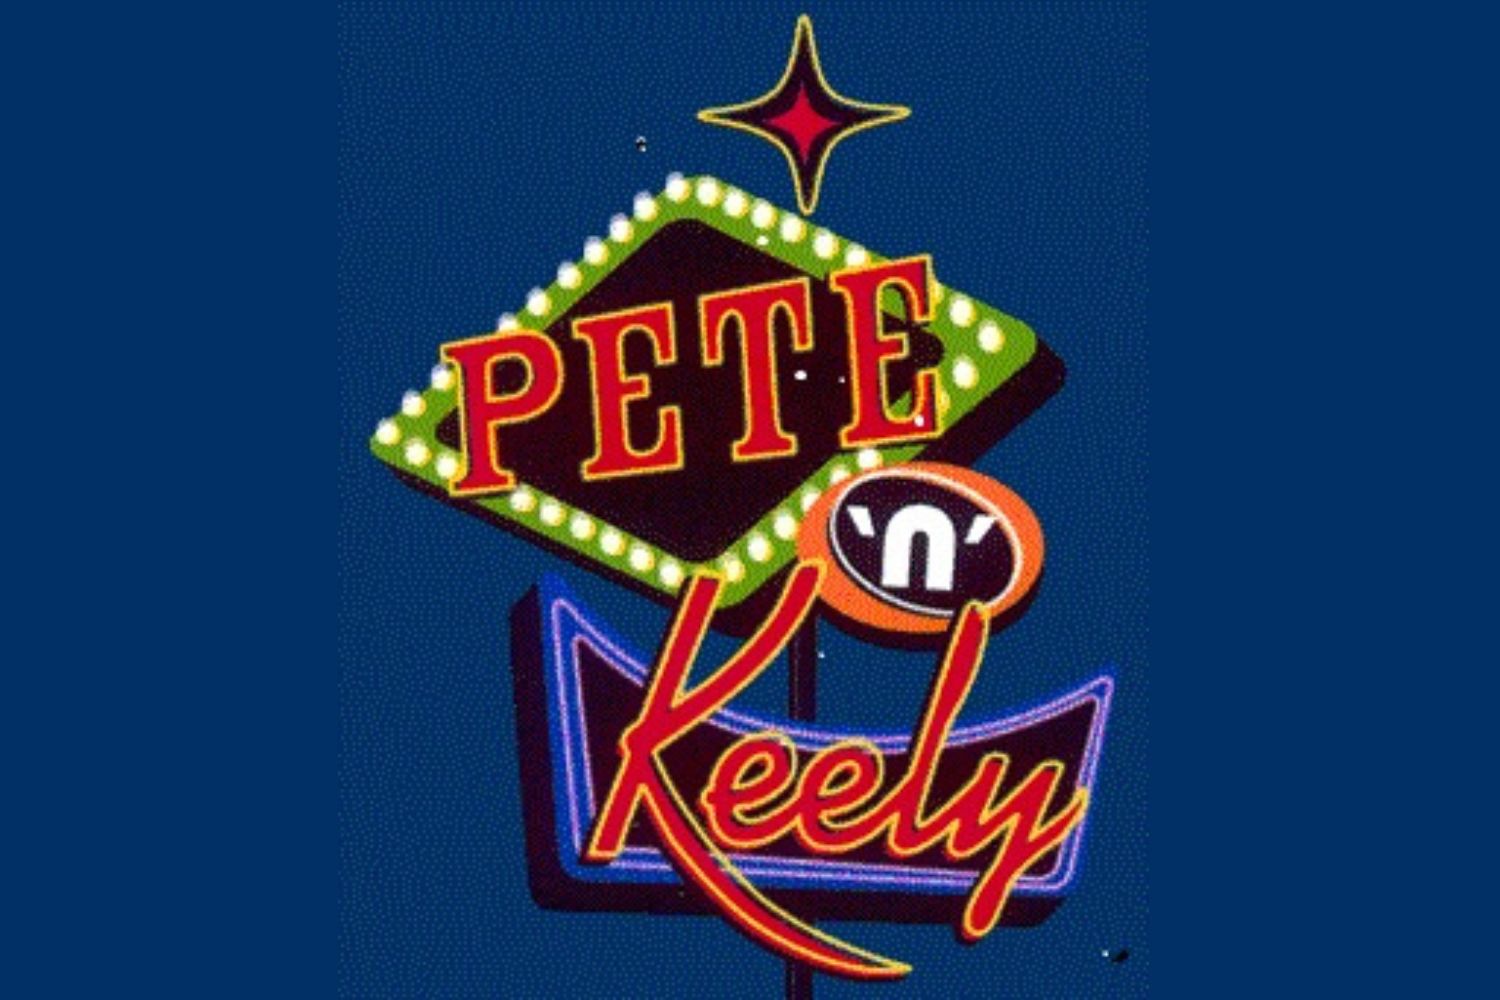 \"Pete & Keely Reunited\" - Thursday, July 13, 2023